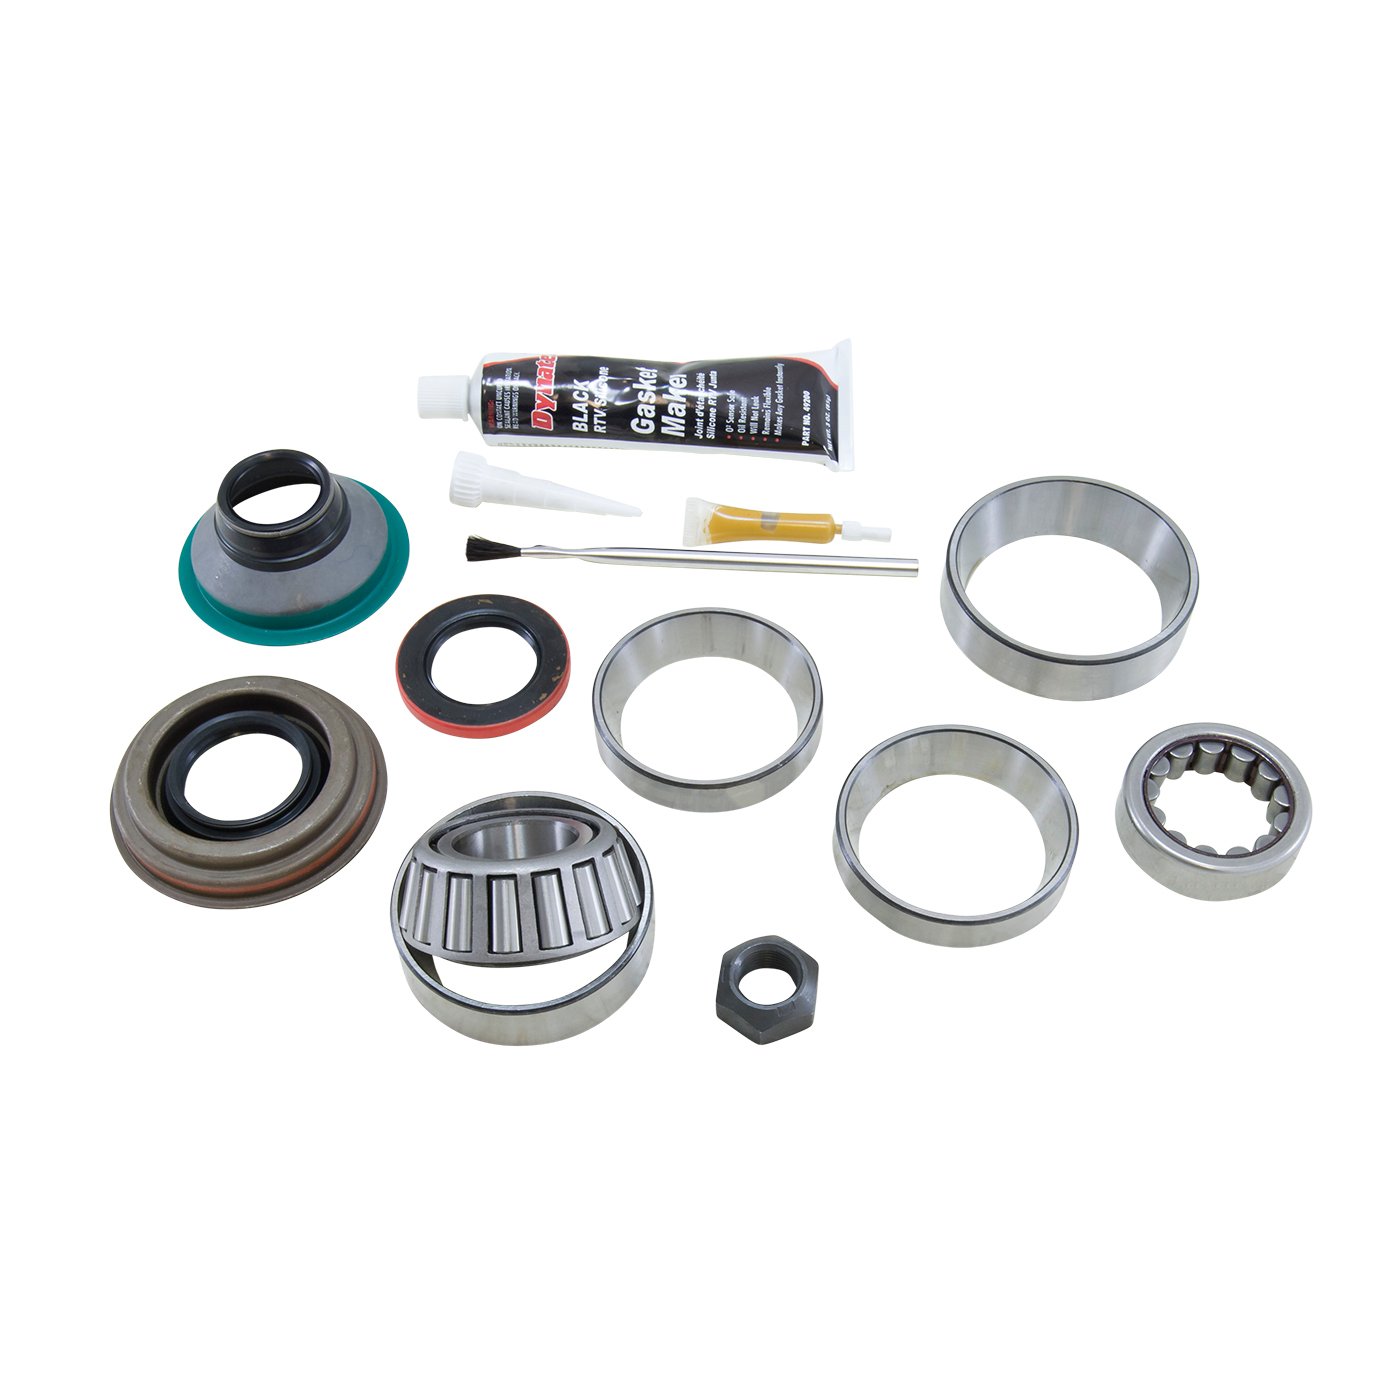 Bearing Install Kit For Dana 44 Dodge Disconnect Front Differential